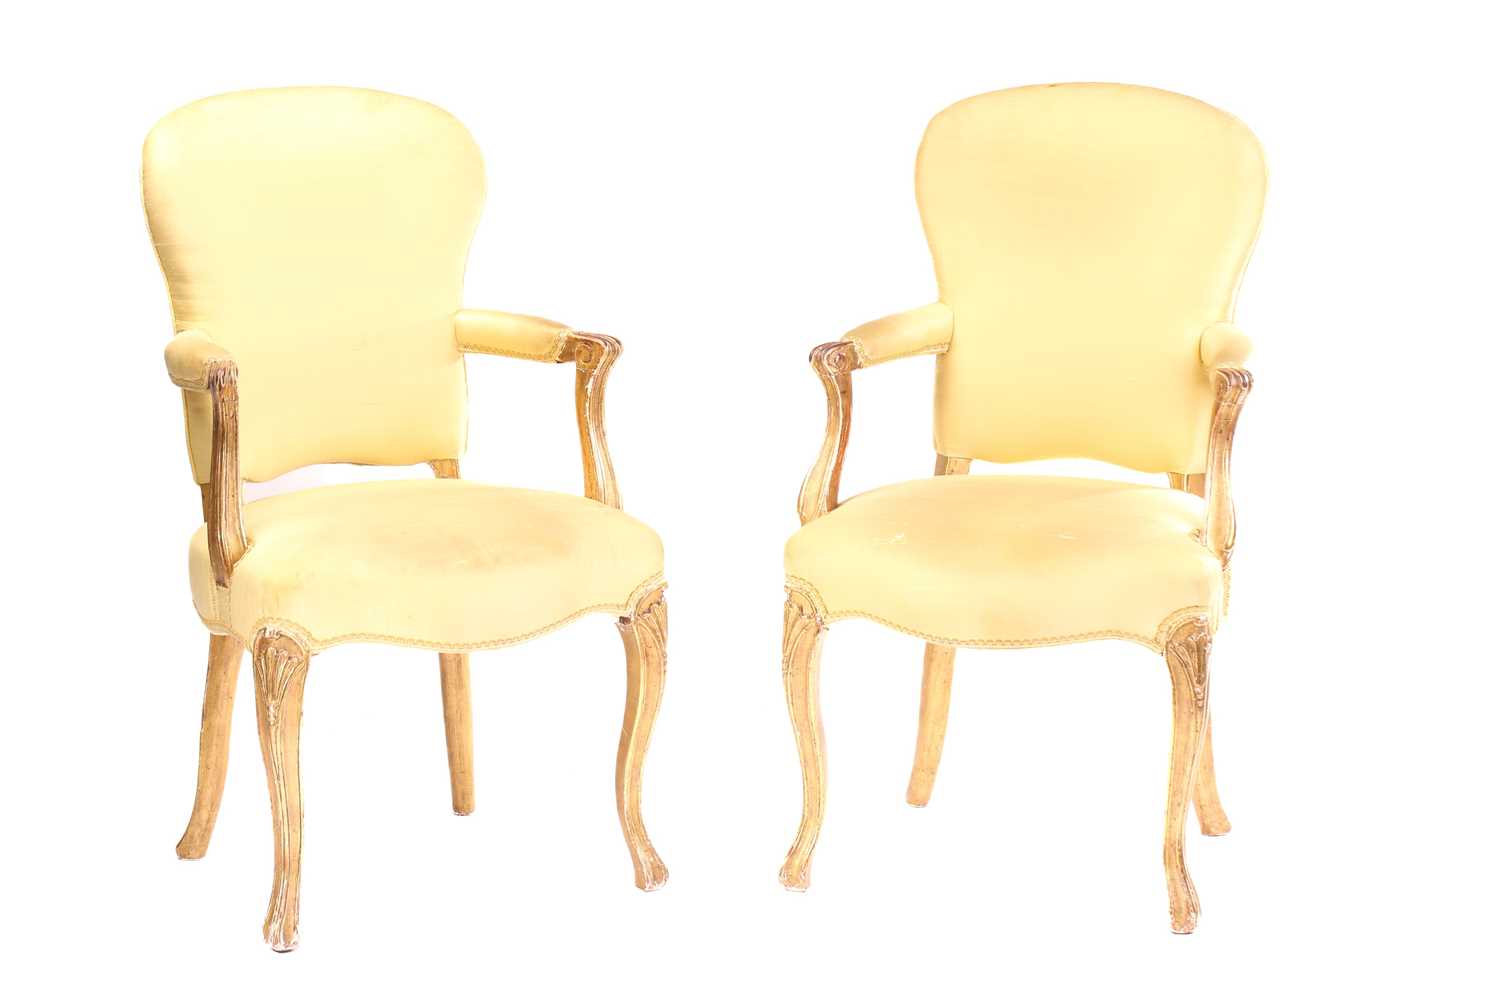 A pair of "French Hepplewhite" design carved wood and gilt gesso library armchairs, 19th century, - Image 2 of 6